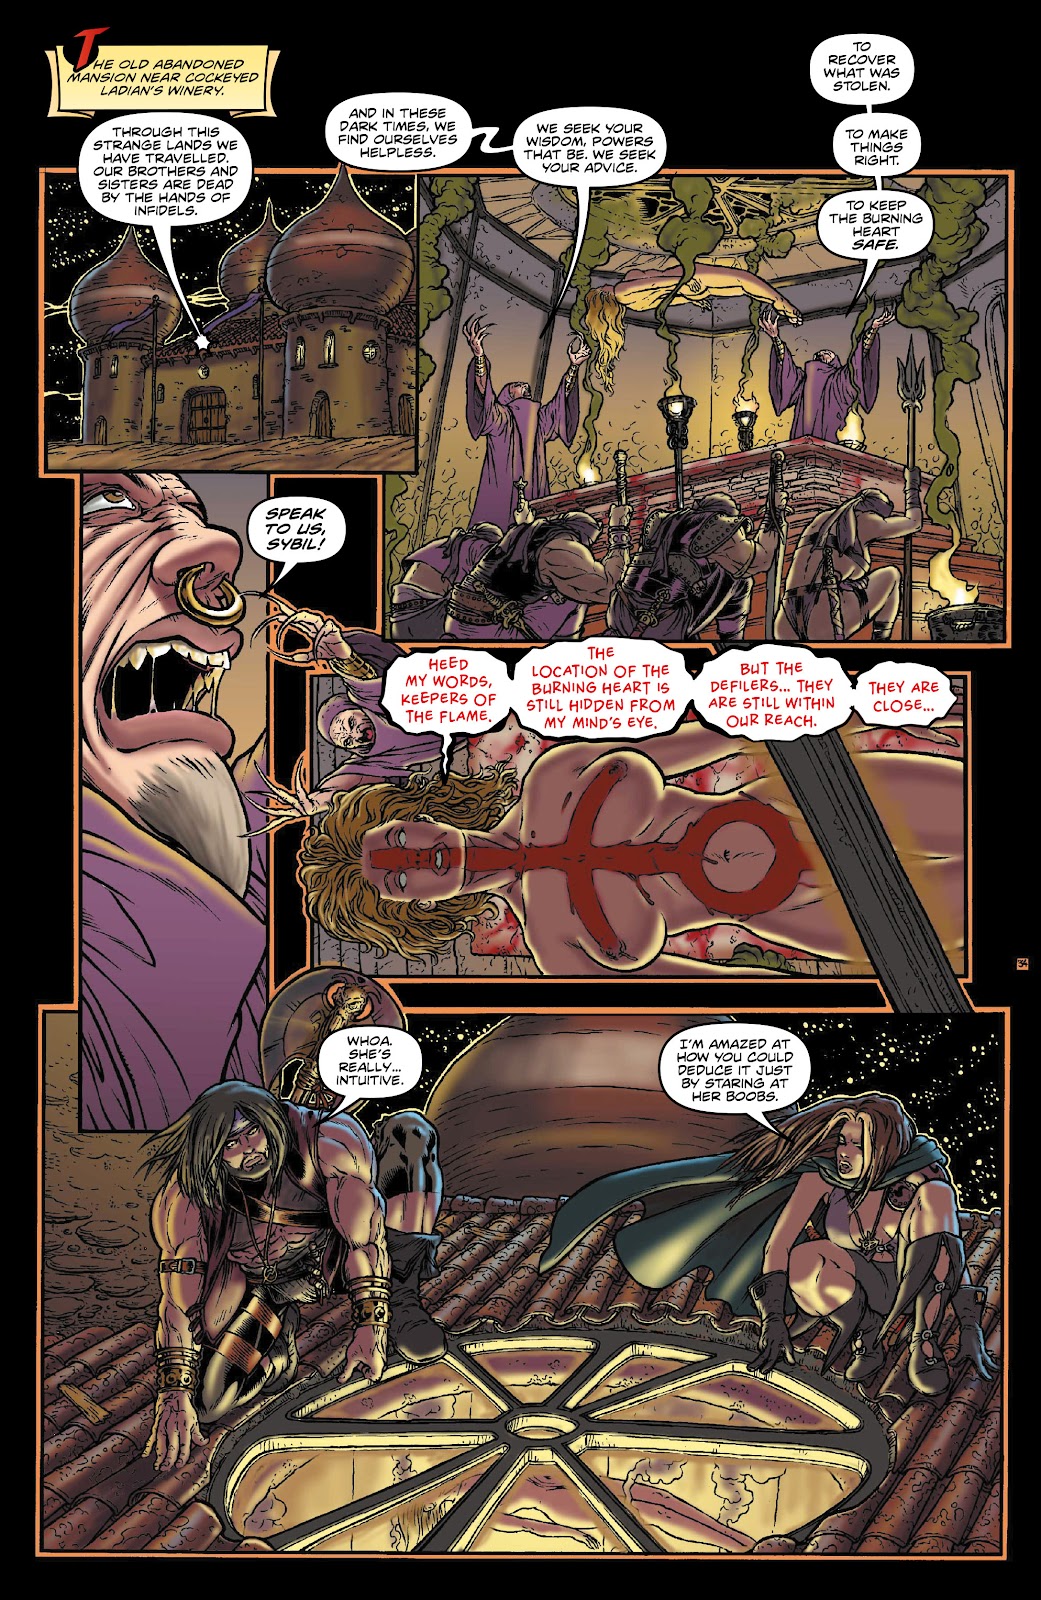 Rogues!: The Burning Heart issue 2 - Page 17